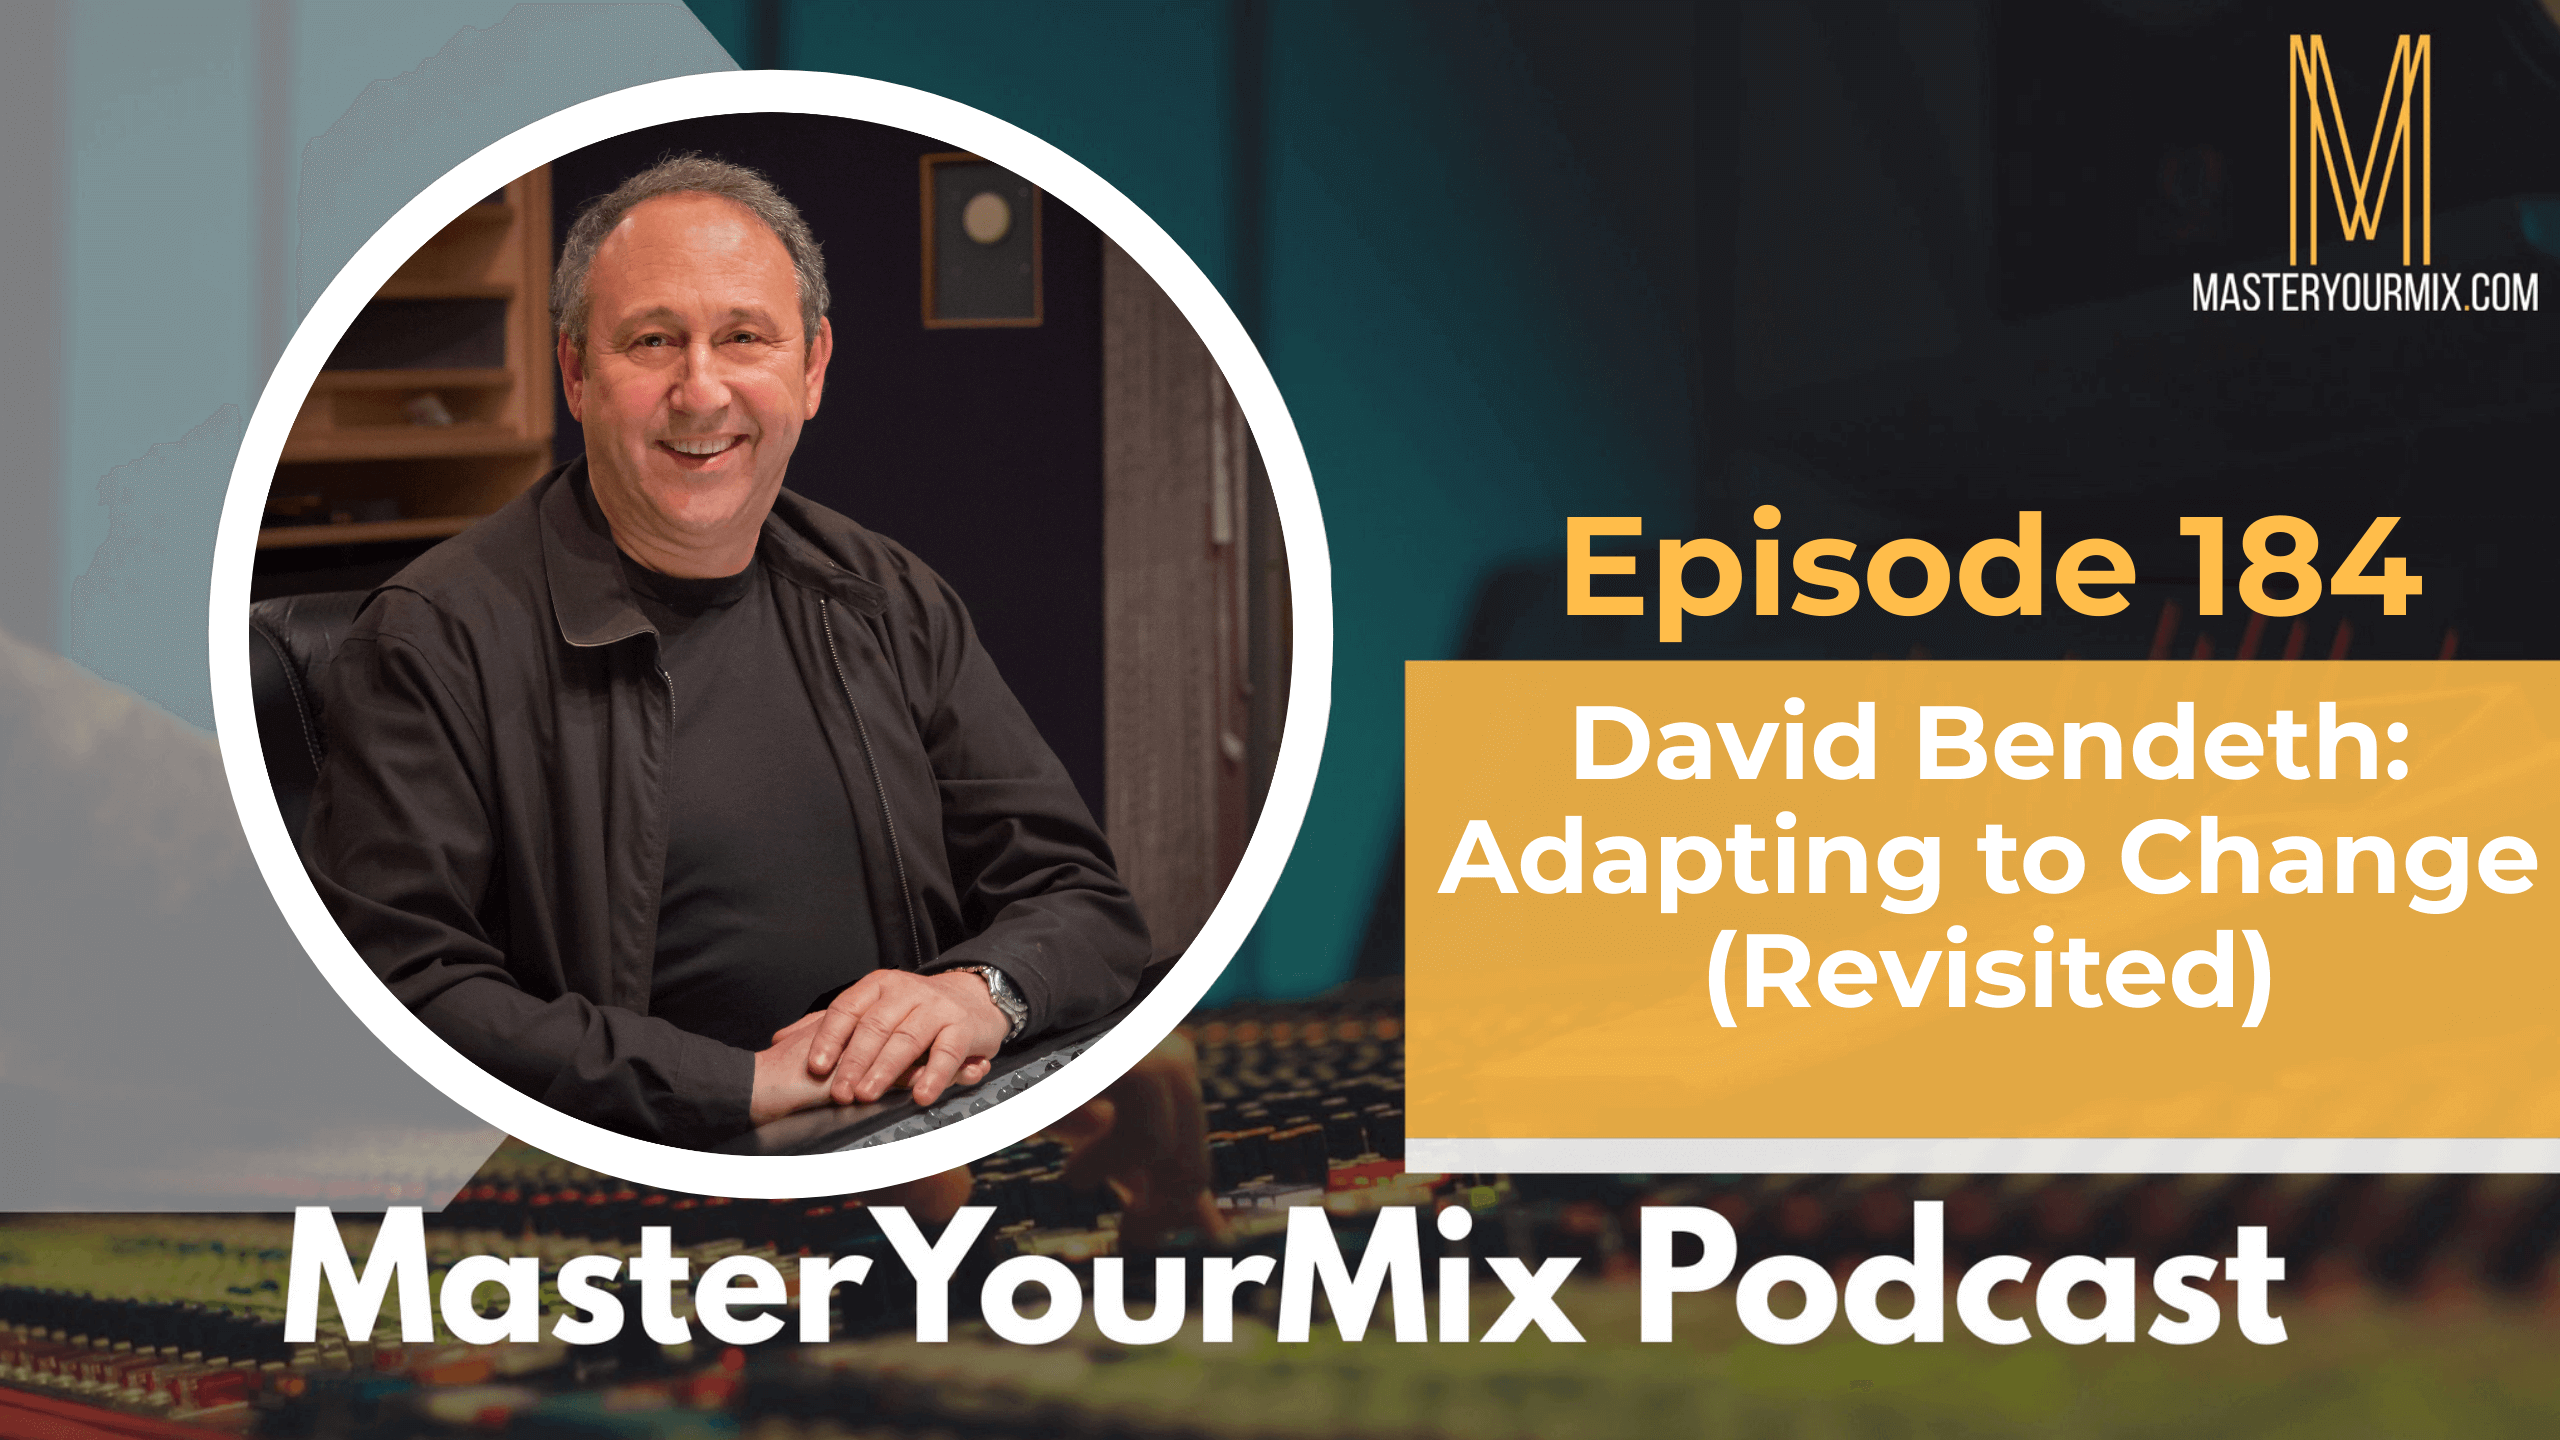 master your mix podcast, ep 184 david bendeth